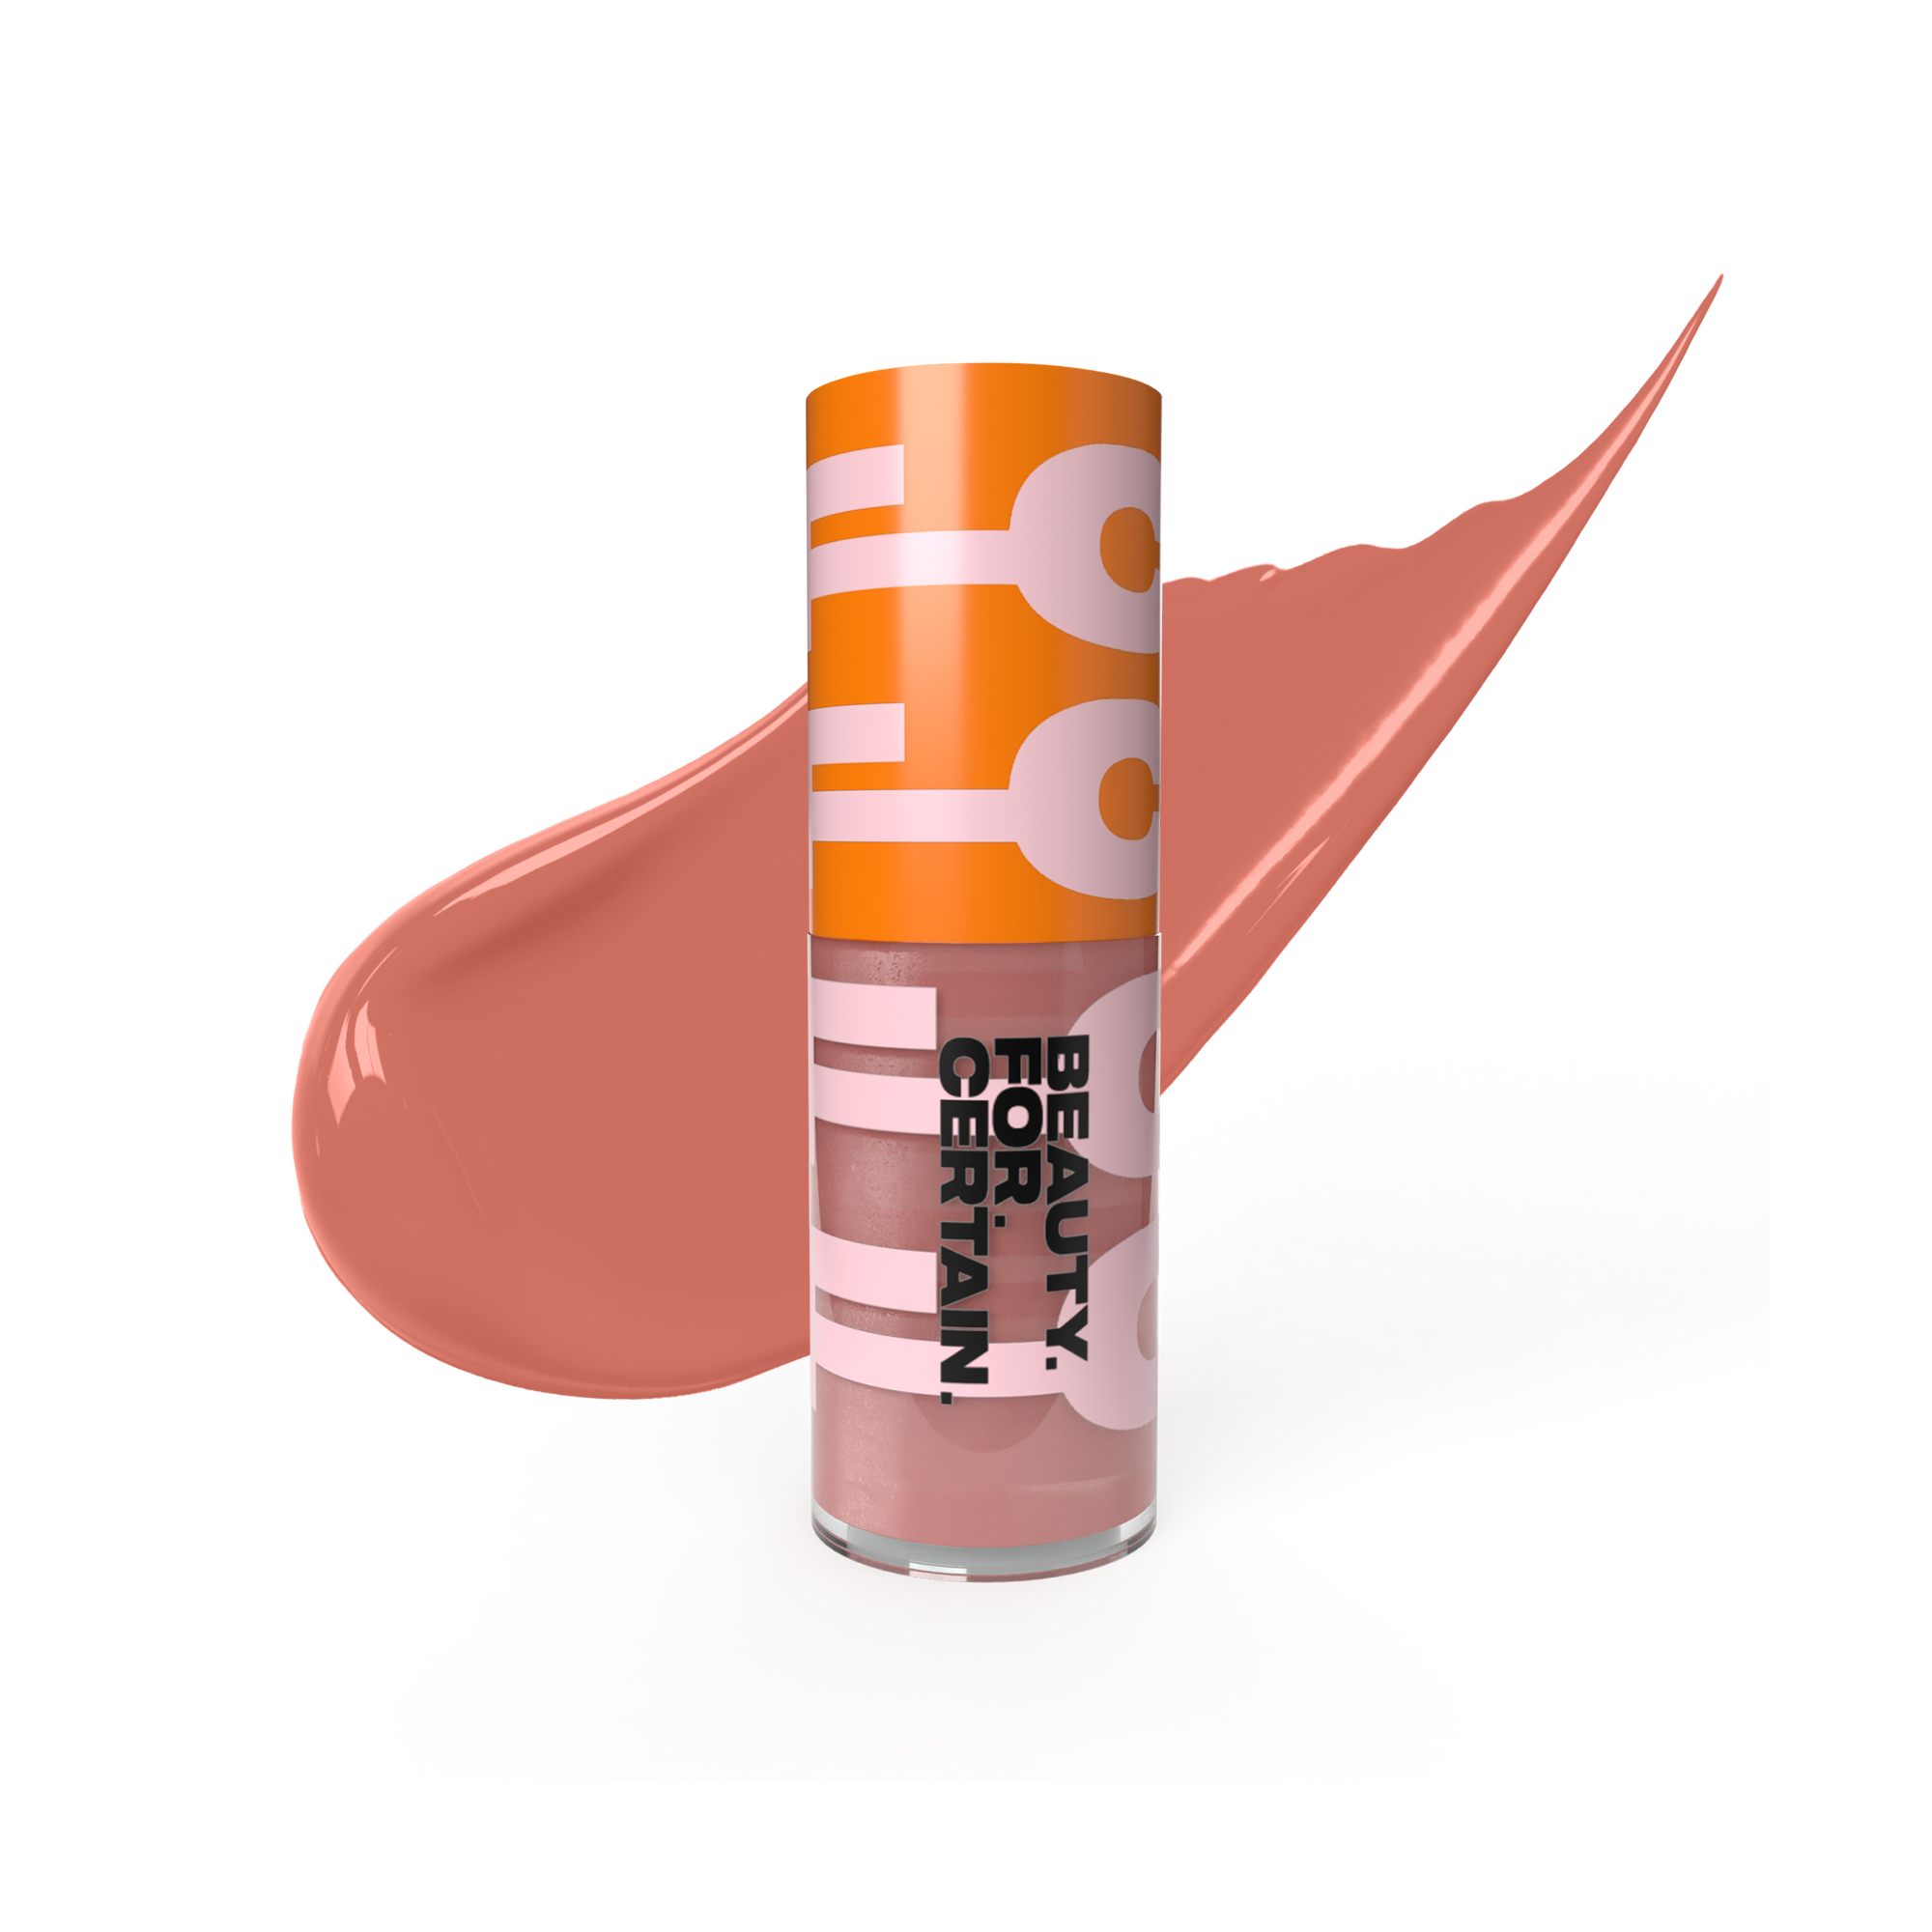 BEAUTY.FOR.CERTAIN. by BIA, high-pigment gloss